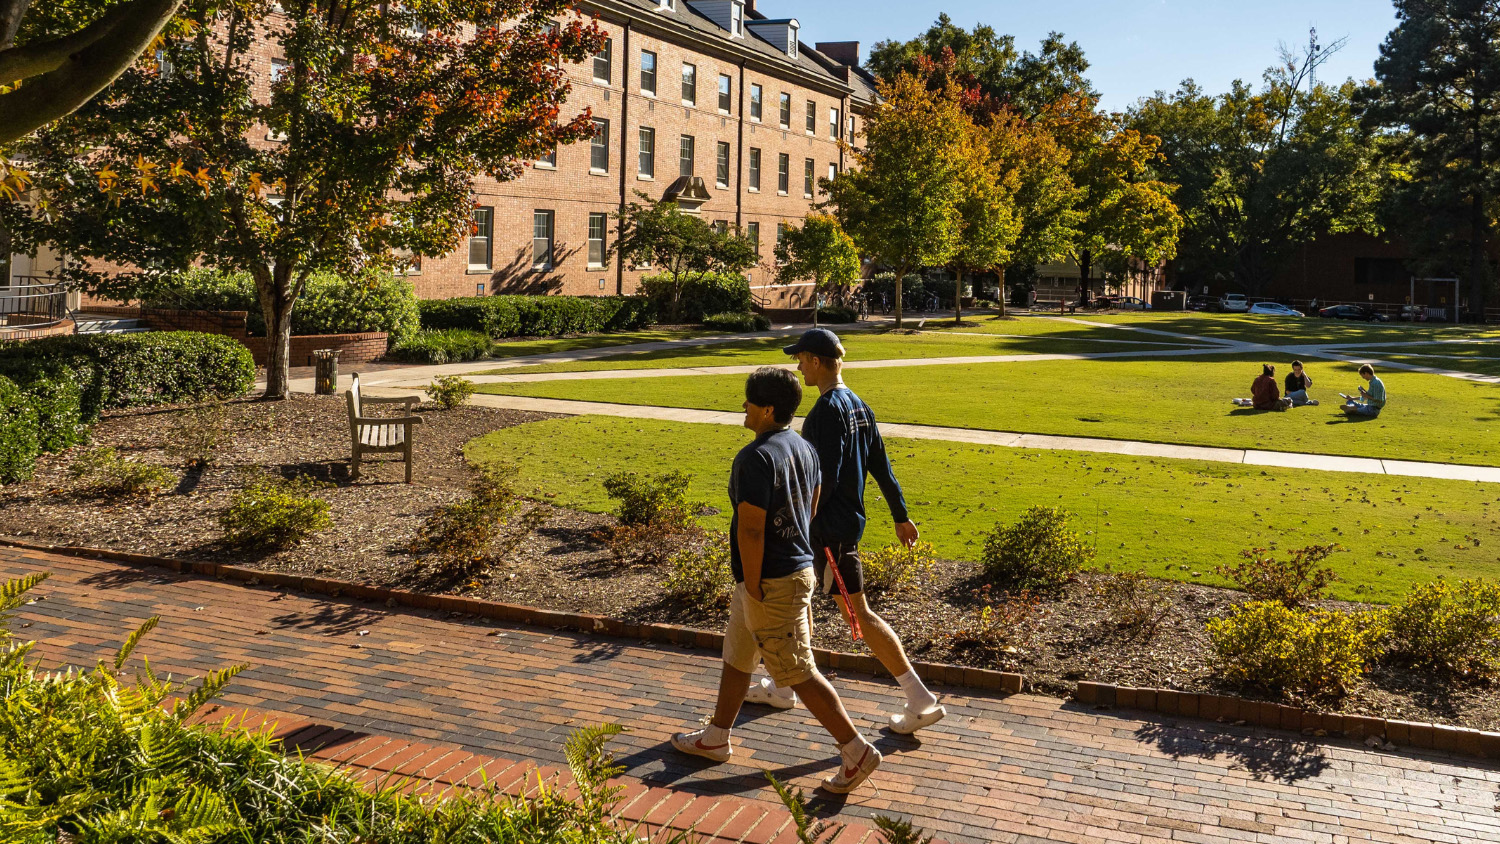 Students walk on a sunlit part of campus.